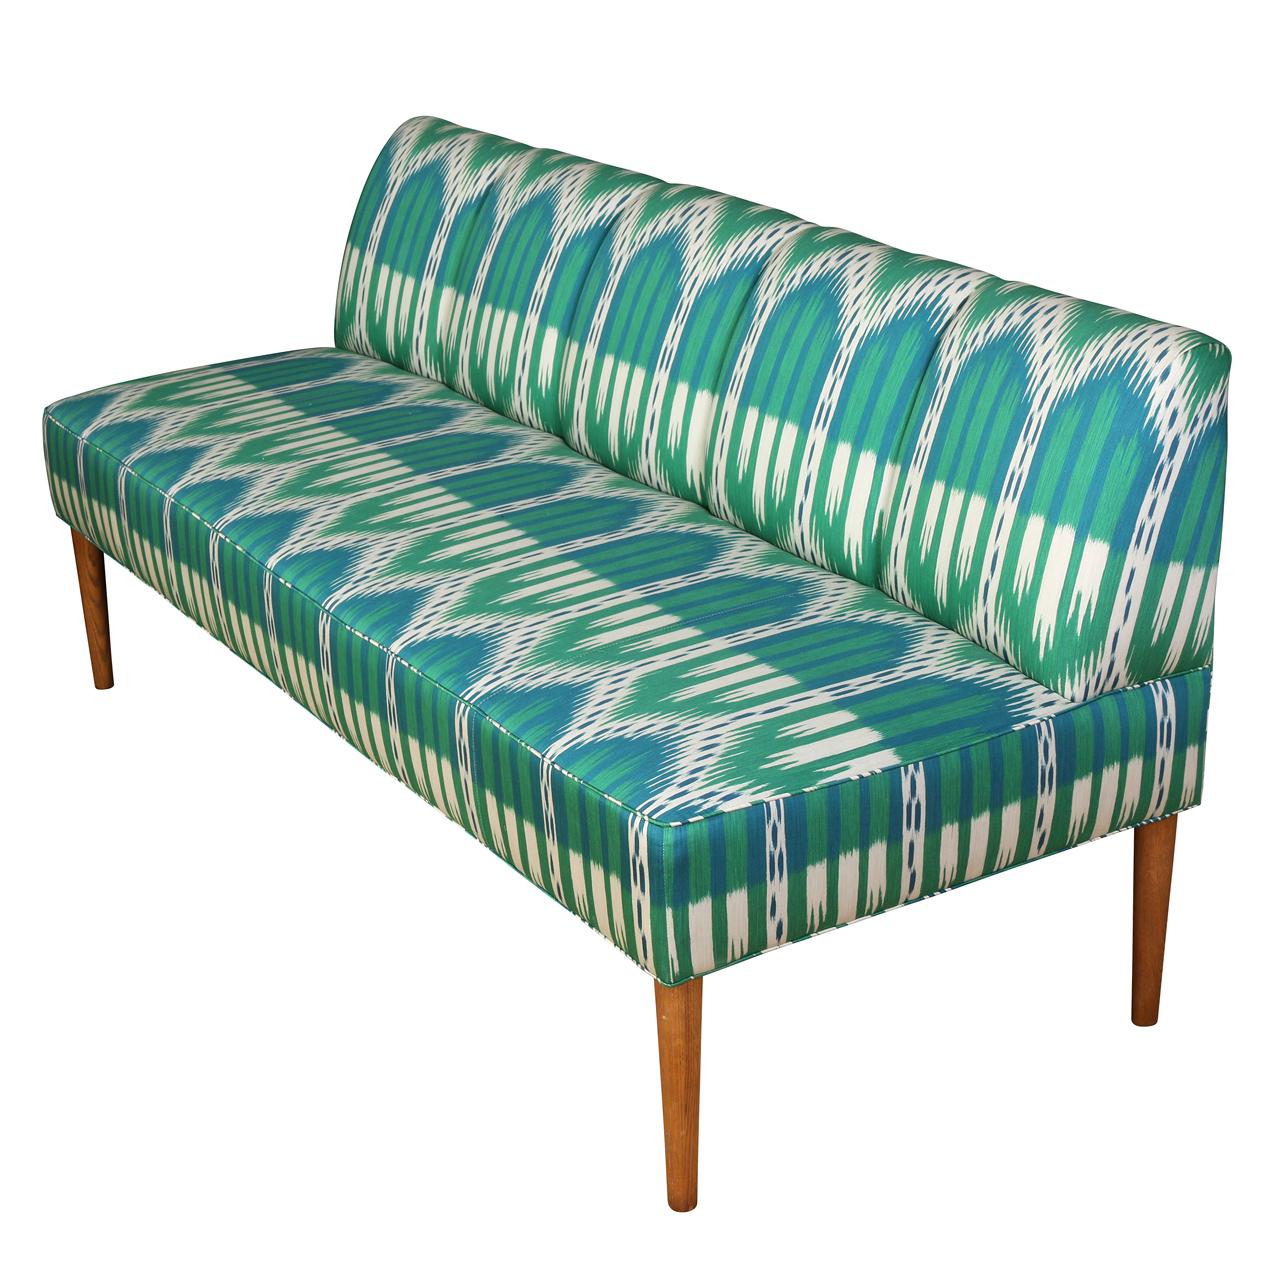 A teal and turquoise ikat upholstered banqette adds a happy punch of color to a room.  The chic bench seating in vibrant blues and greens has a channel back and self welt bench seat with slender and tapered wood legs.